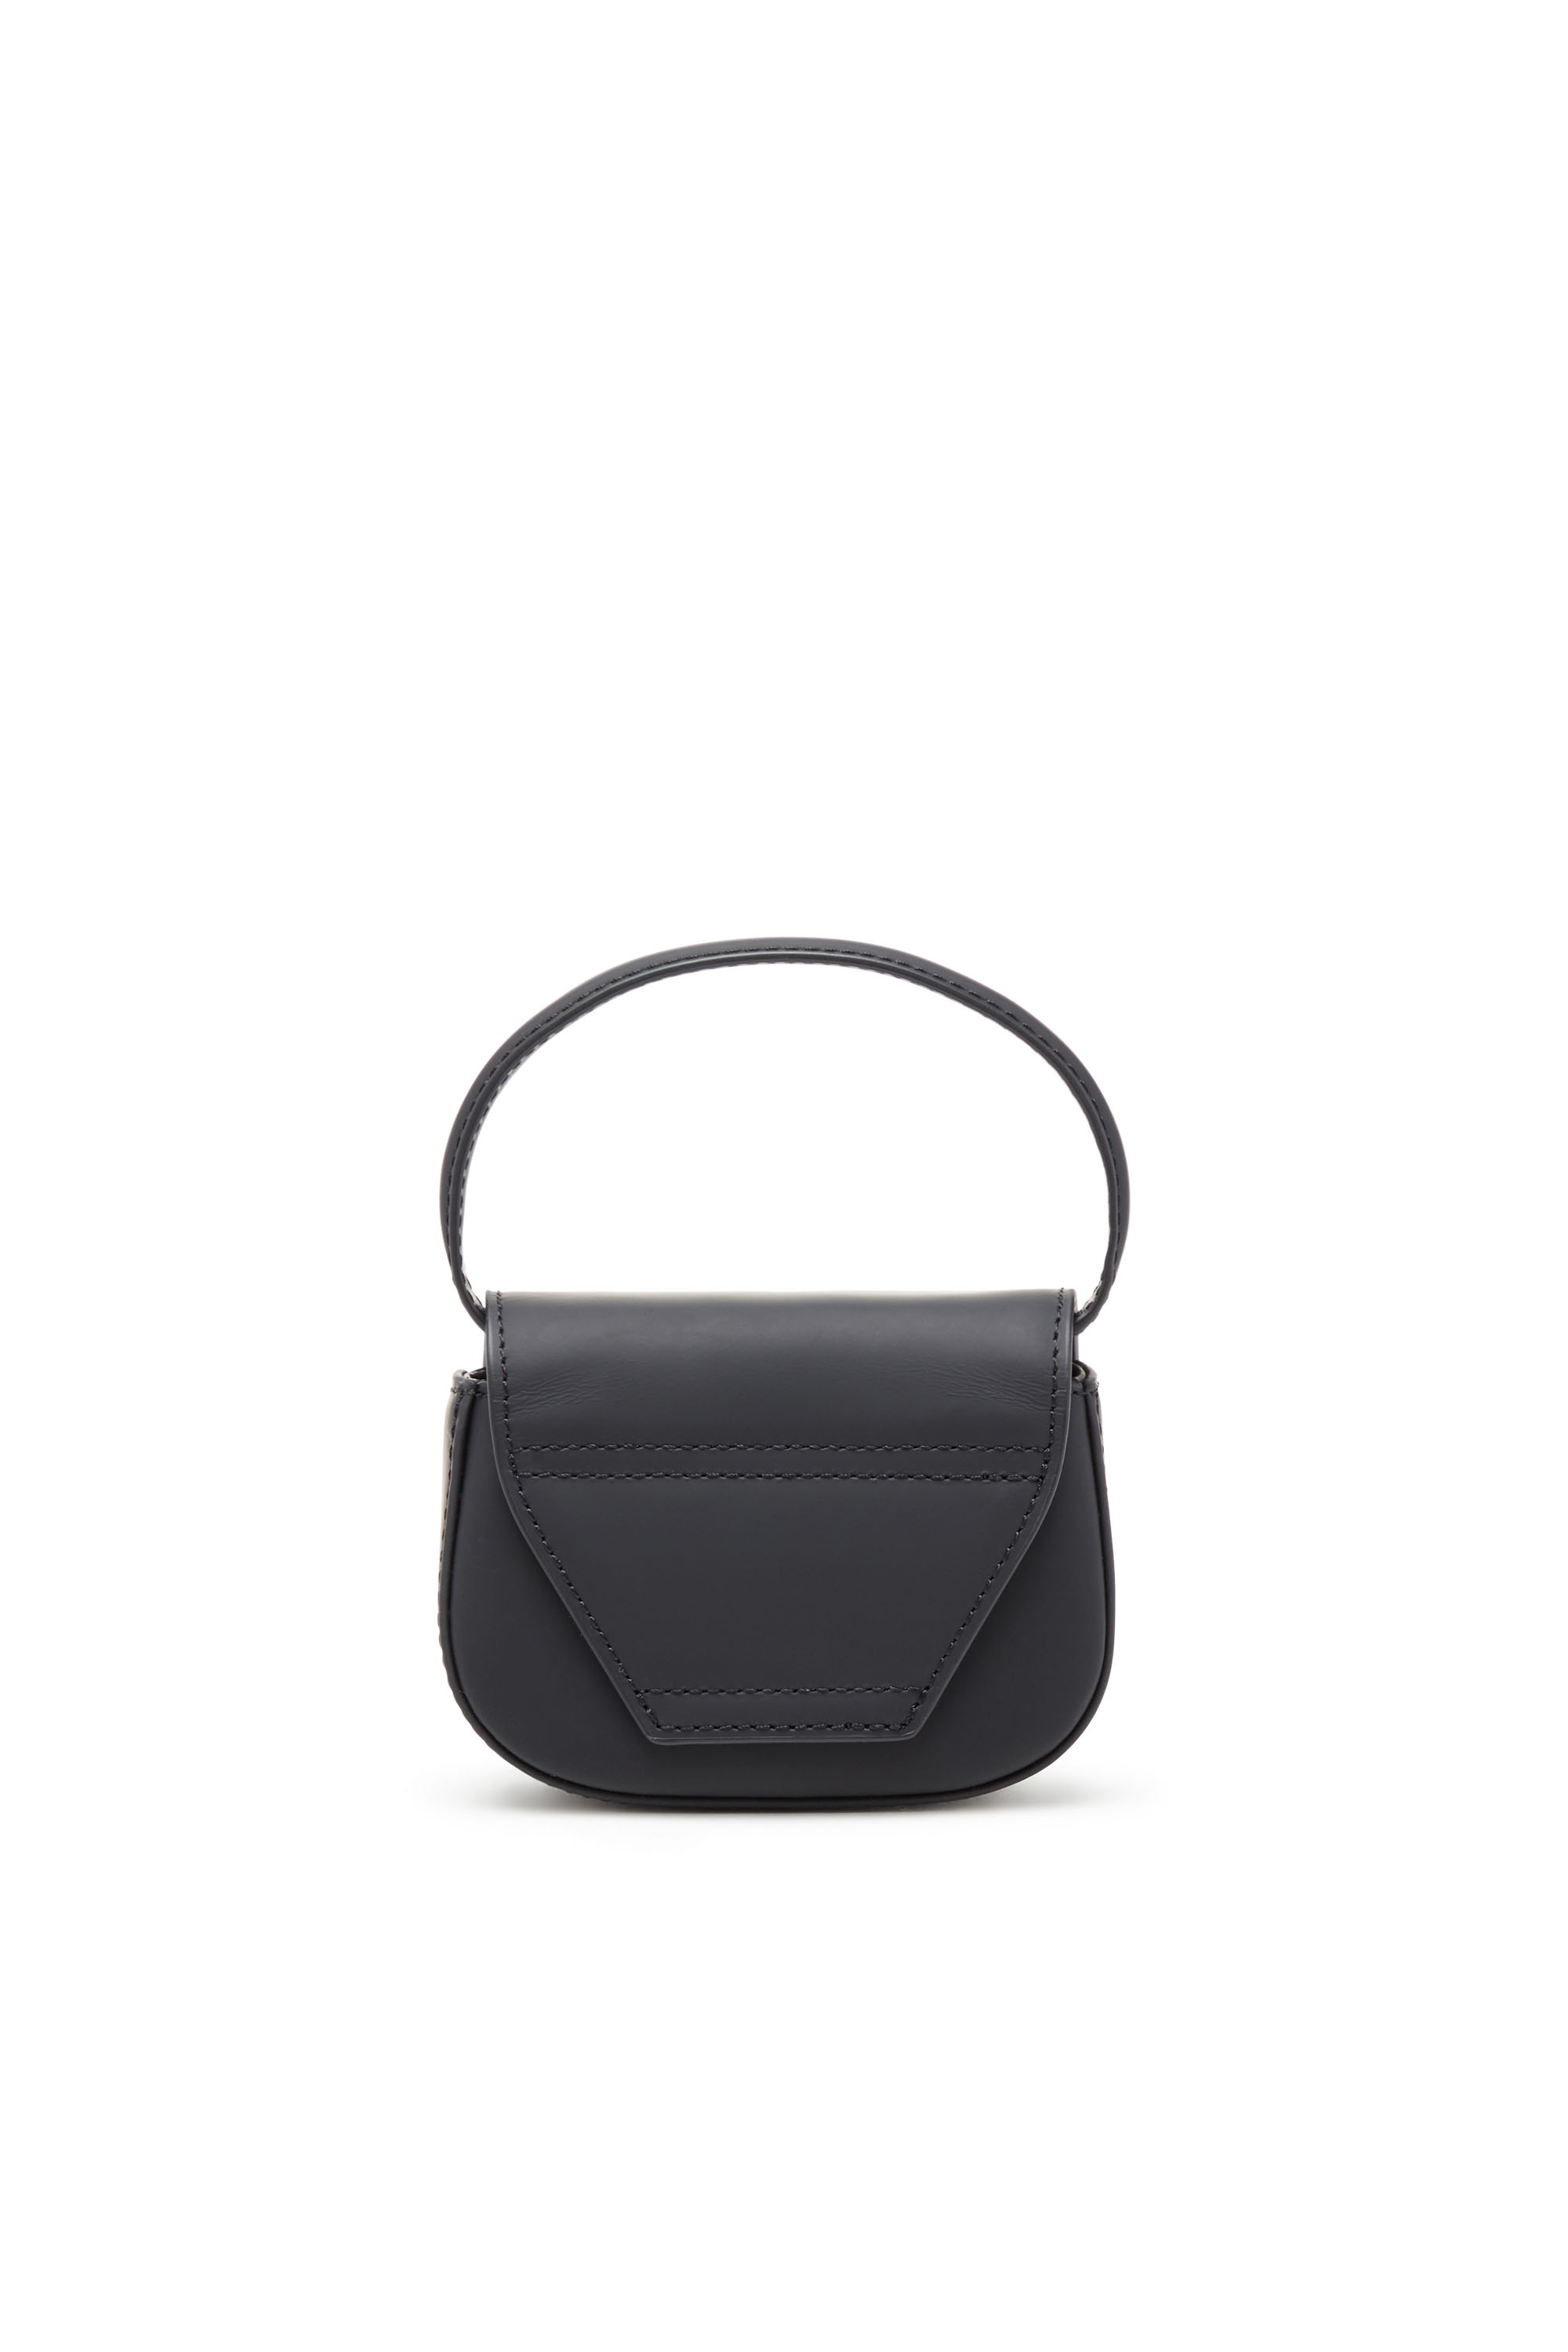 Diesel - 1DR XS, Woman 1DR Xs-Iconic mini bag in matte leather in Black - Image 2